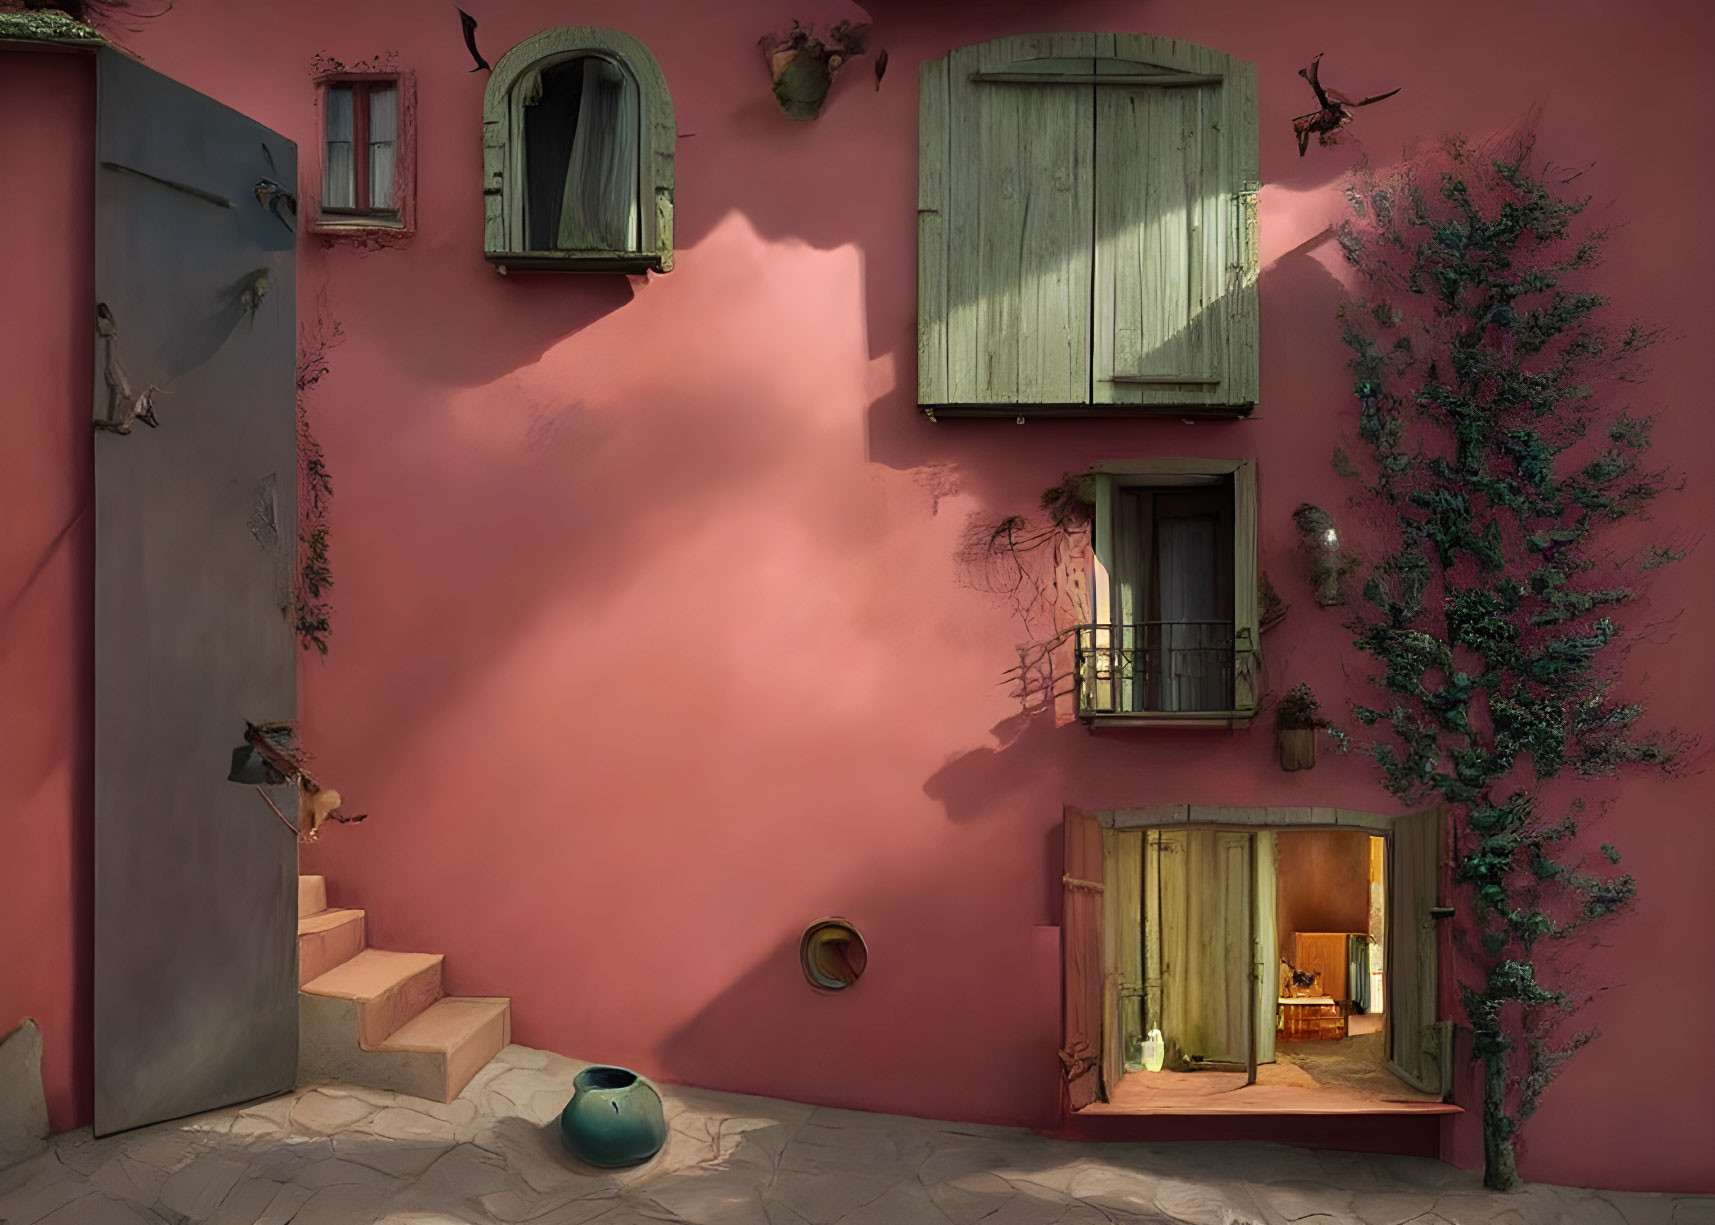 Pink facade with green shutters, ivy, flying keys, cozy interior glimpsed through open door